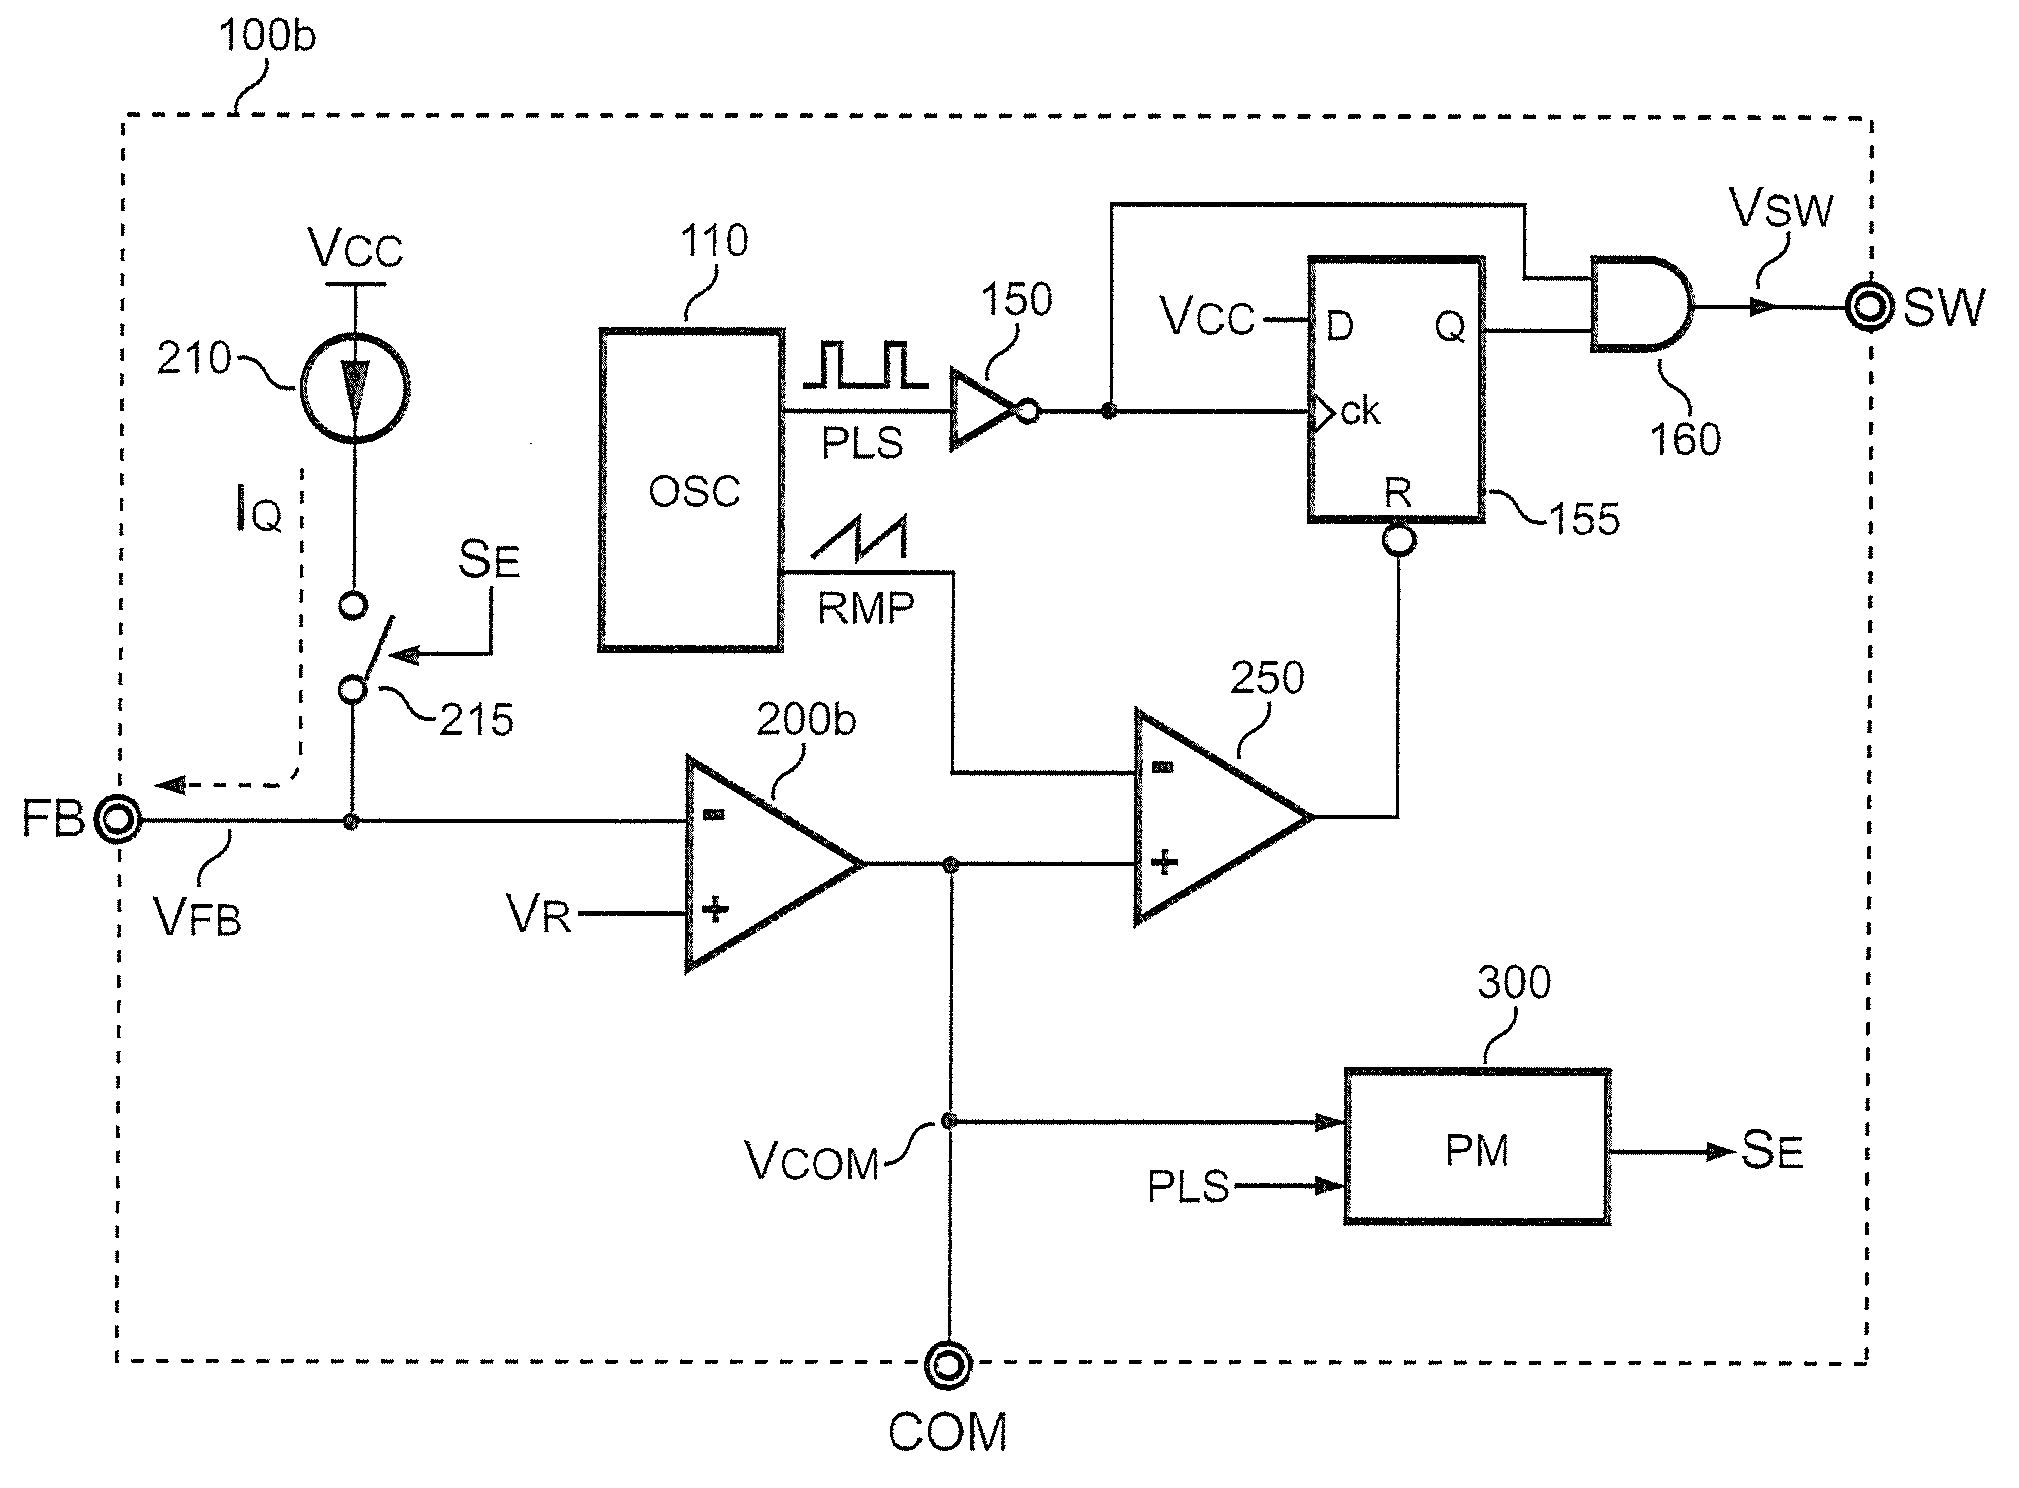 Switching controller having programmable feedback circuit for power converters